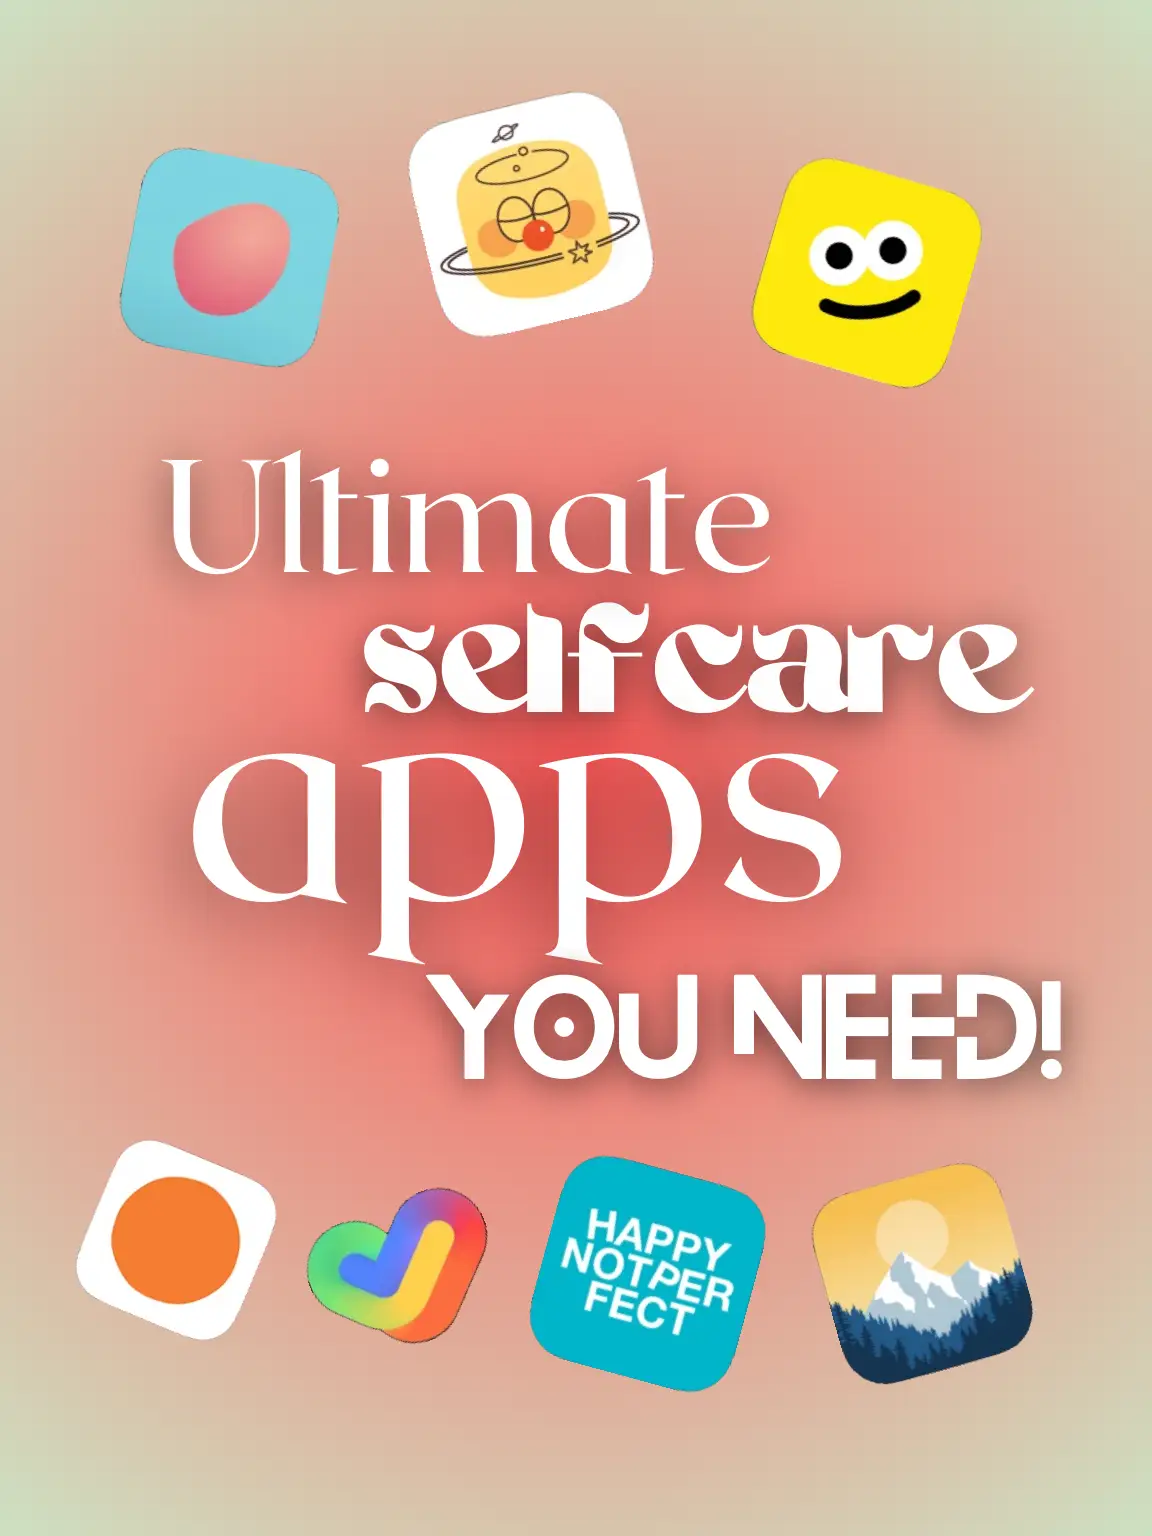 selfcare apps for a calmer soul! 💗🥰❤️‍🩹's images